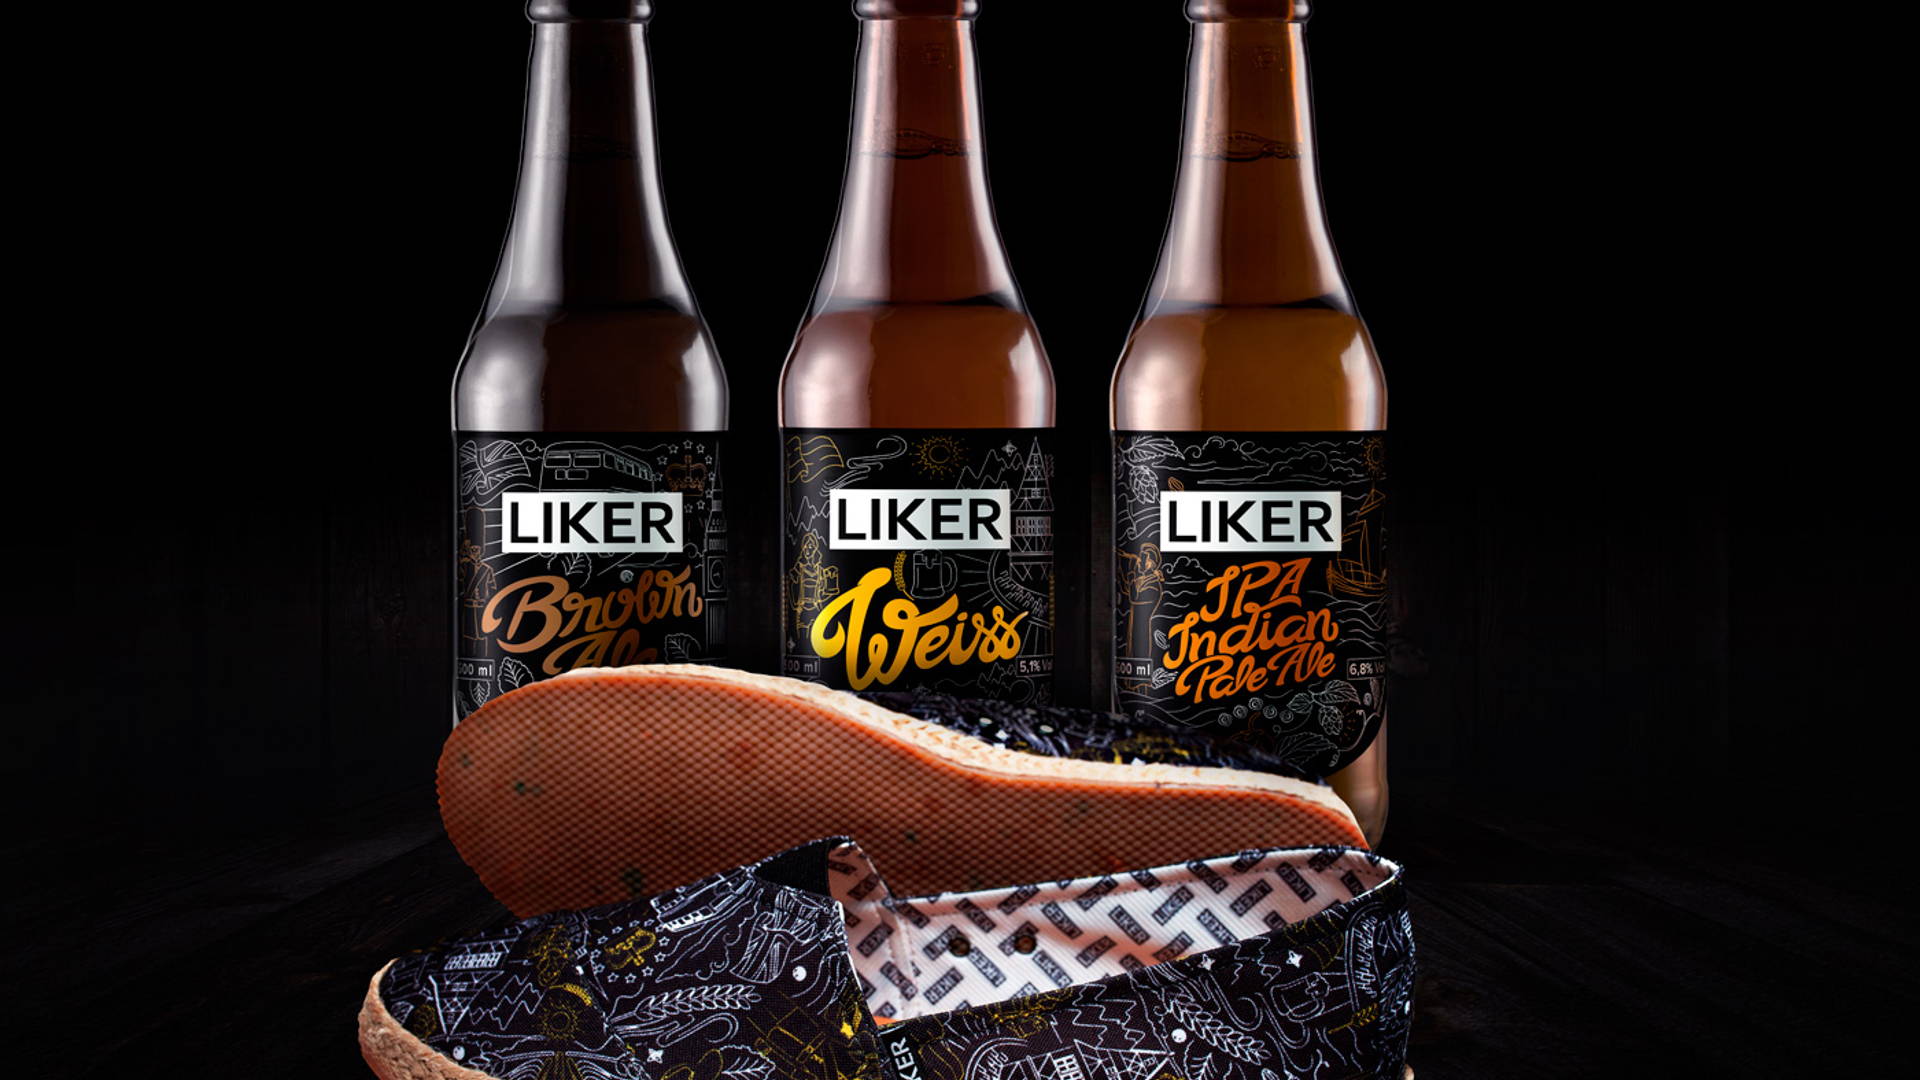 Featured image for The Illustrated Label of This Beer was Inspired By a Shoe Brand